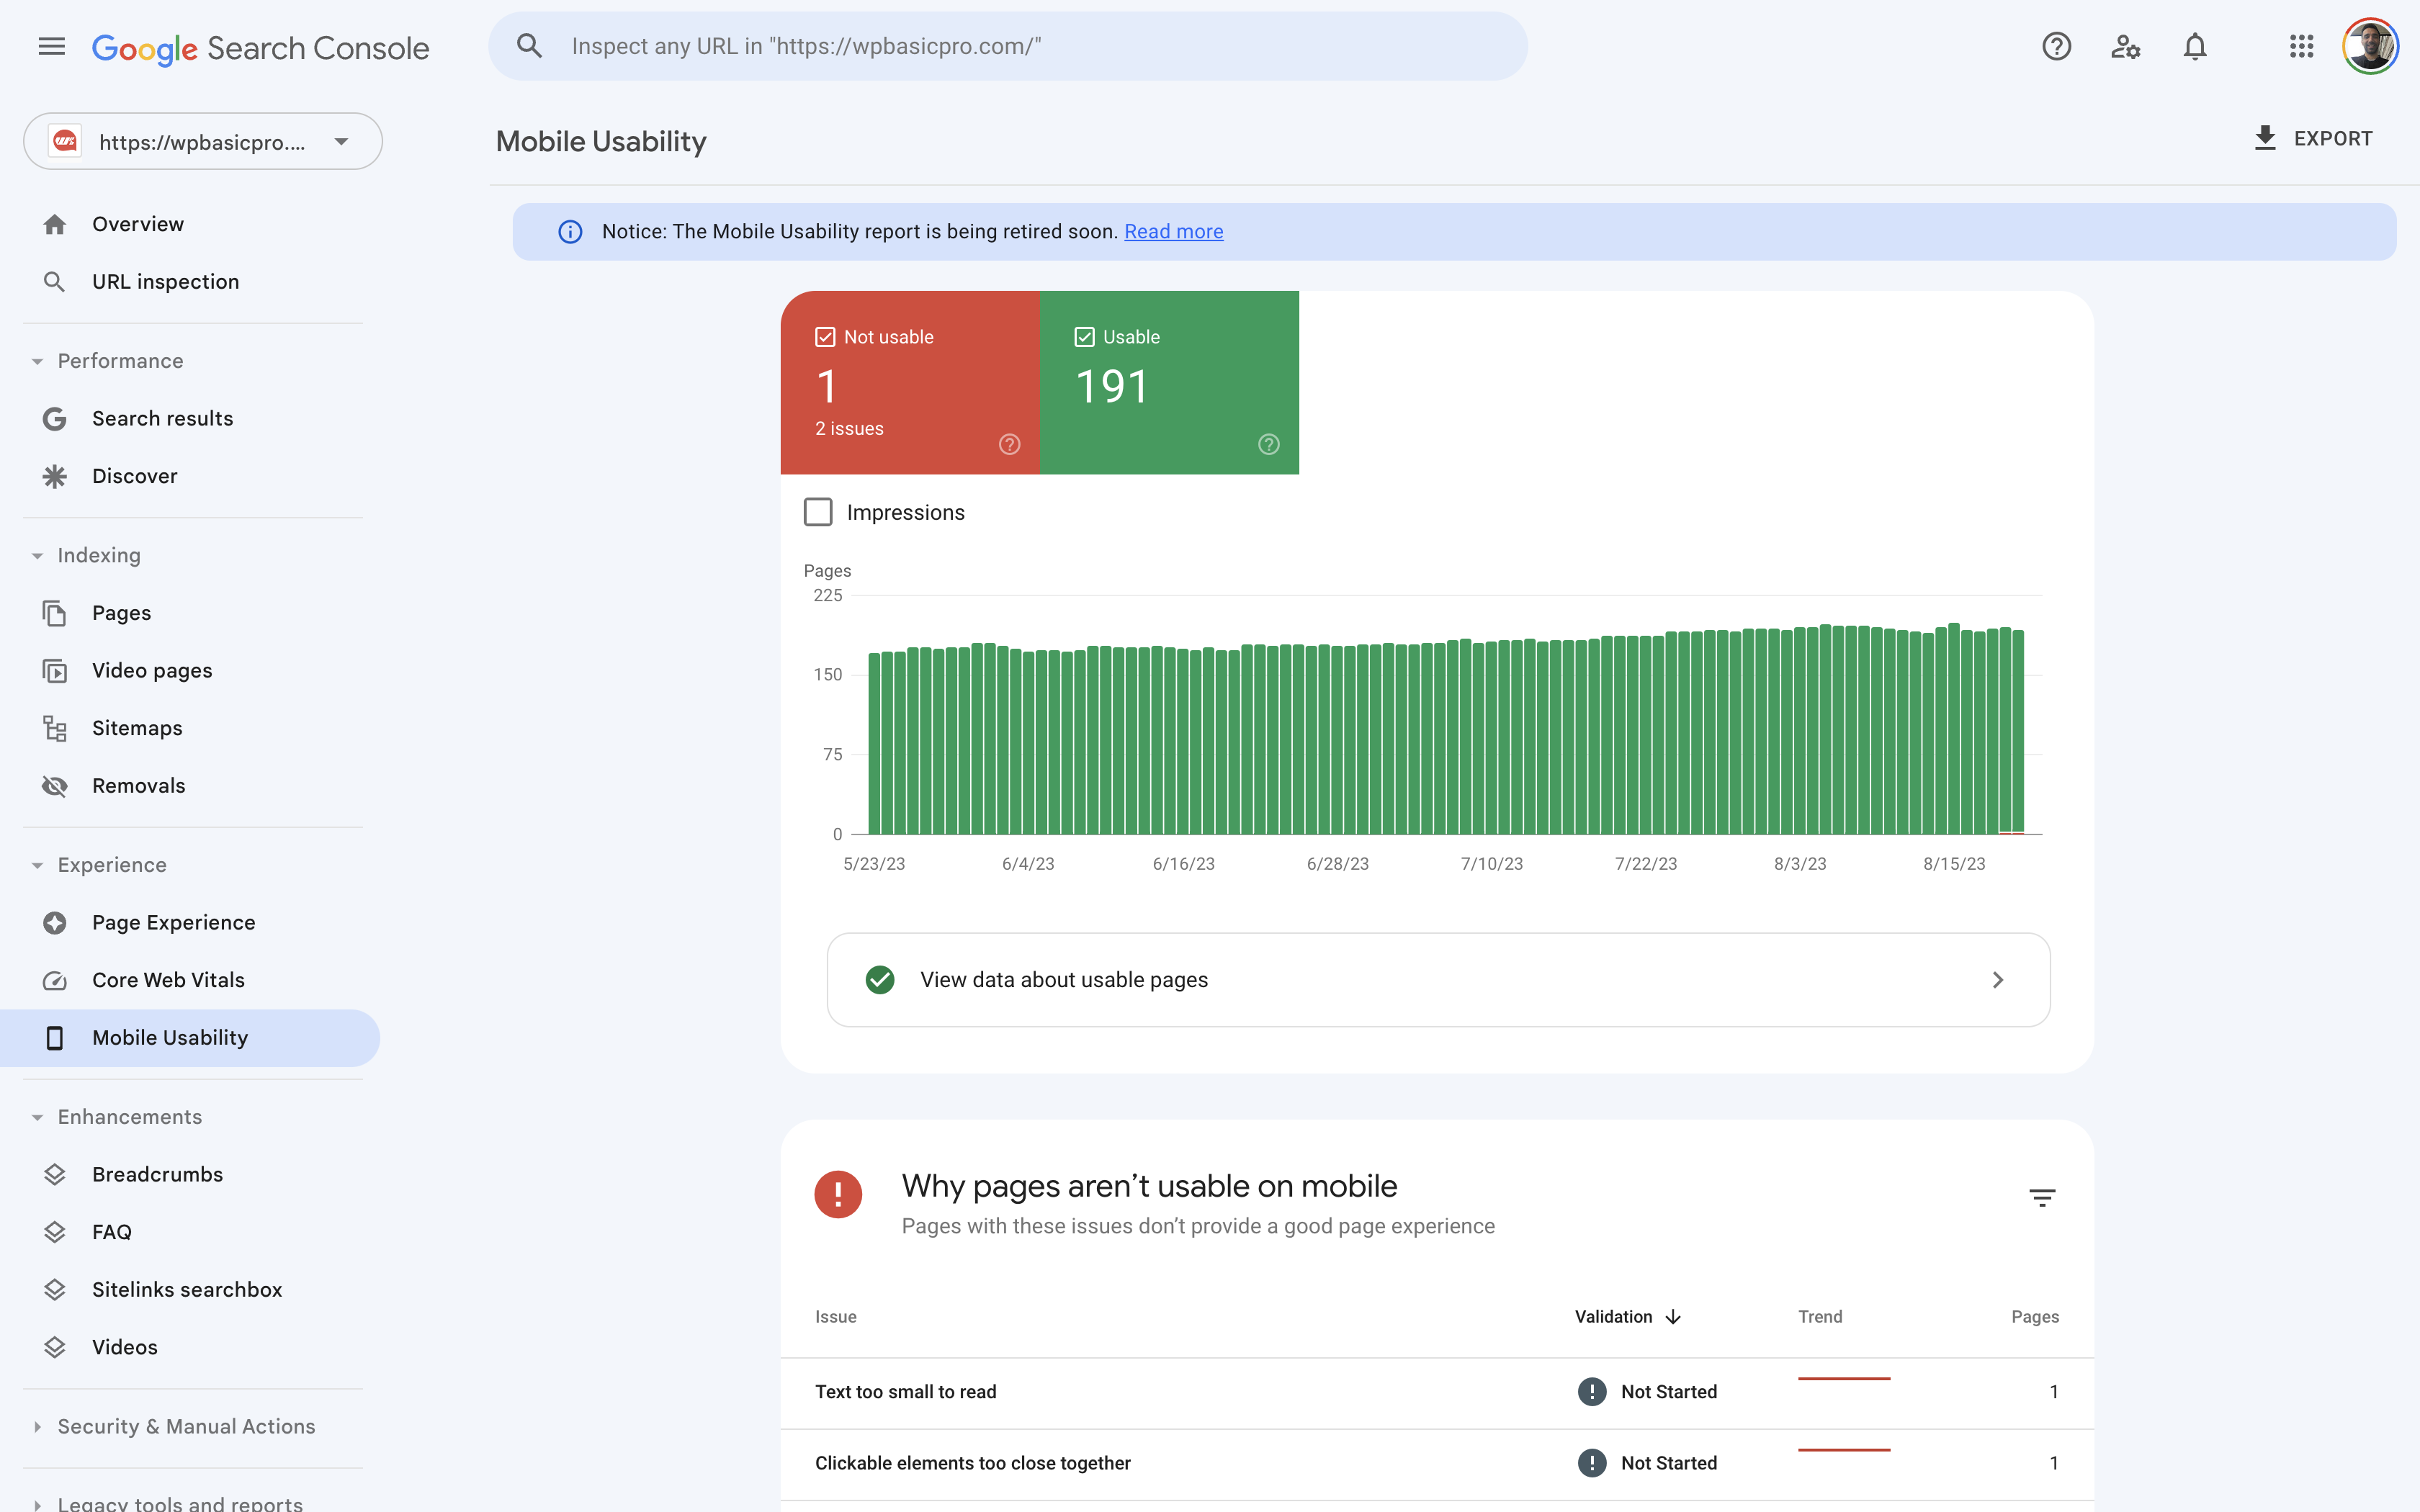 Google Search Console: Mobile Usability Tab